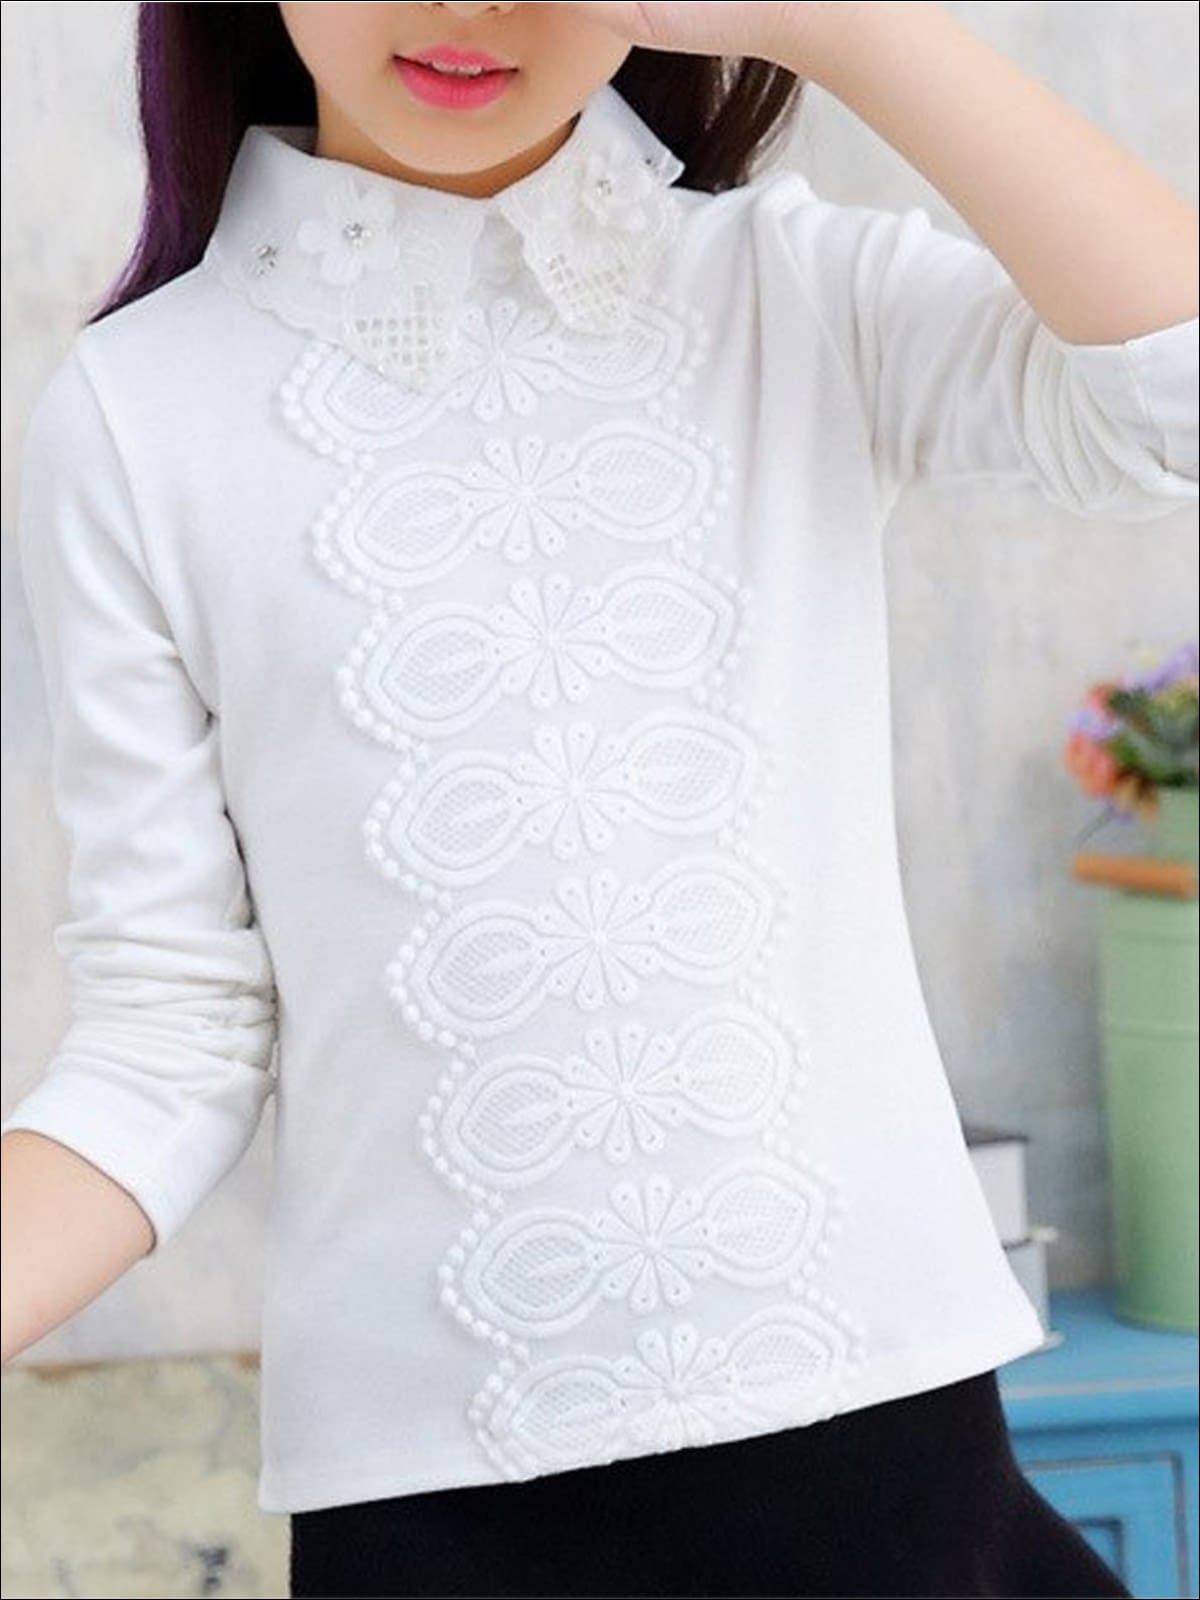 Girls Preppy Floral Lace Applique Long Sleeve Top - White / 3T - Girls Fall Top